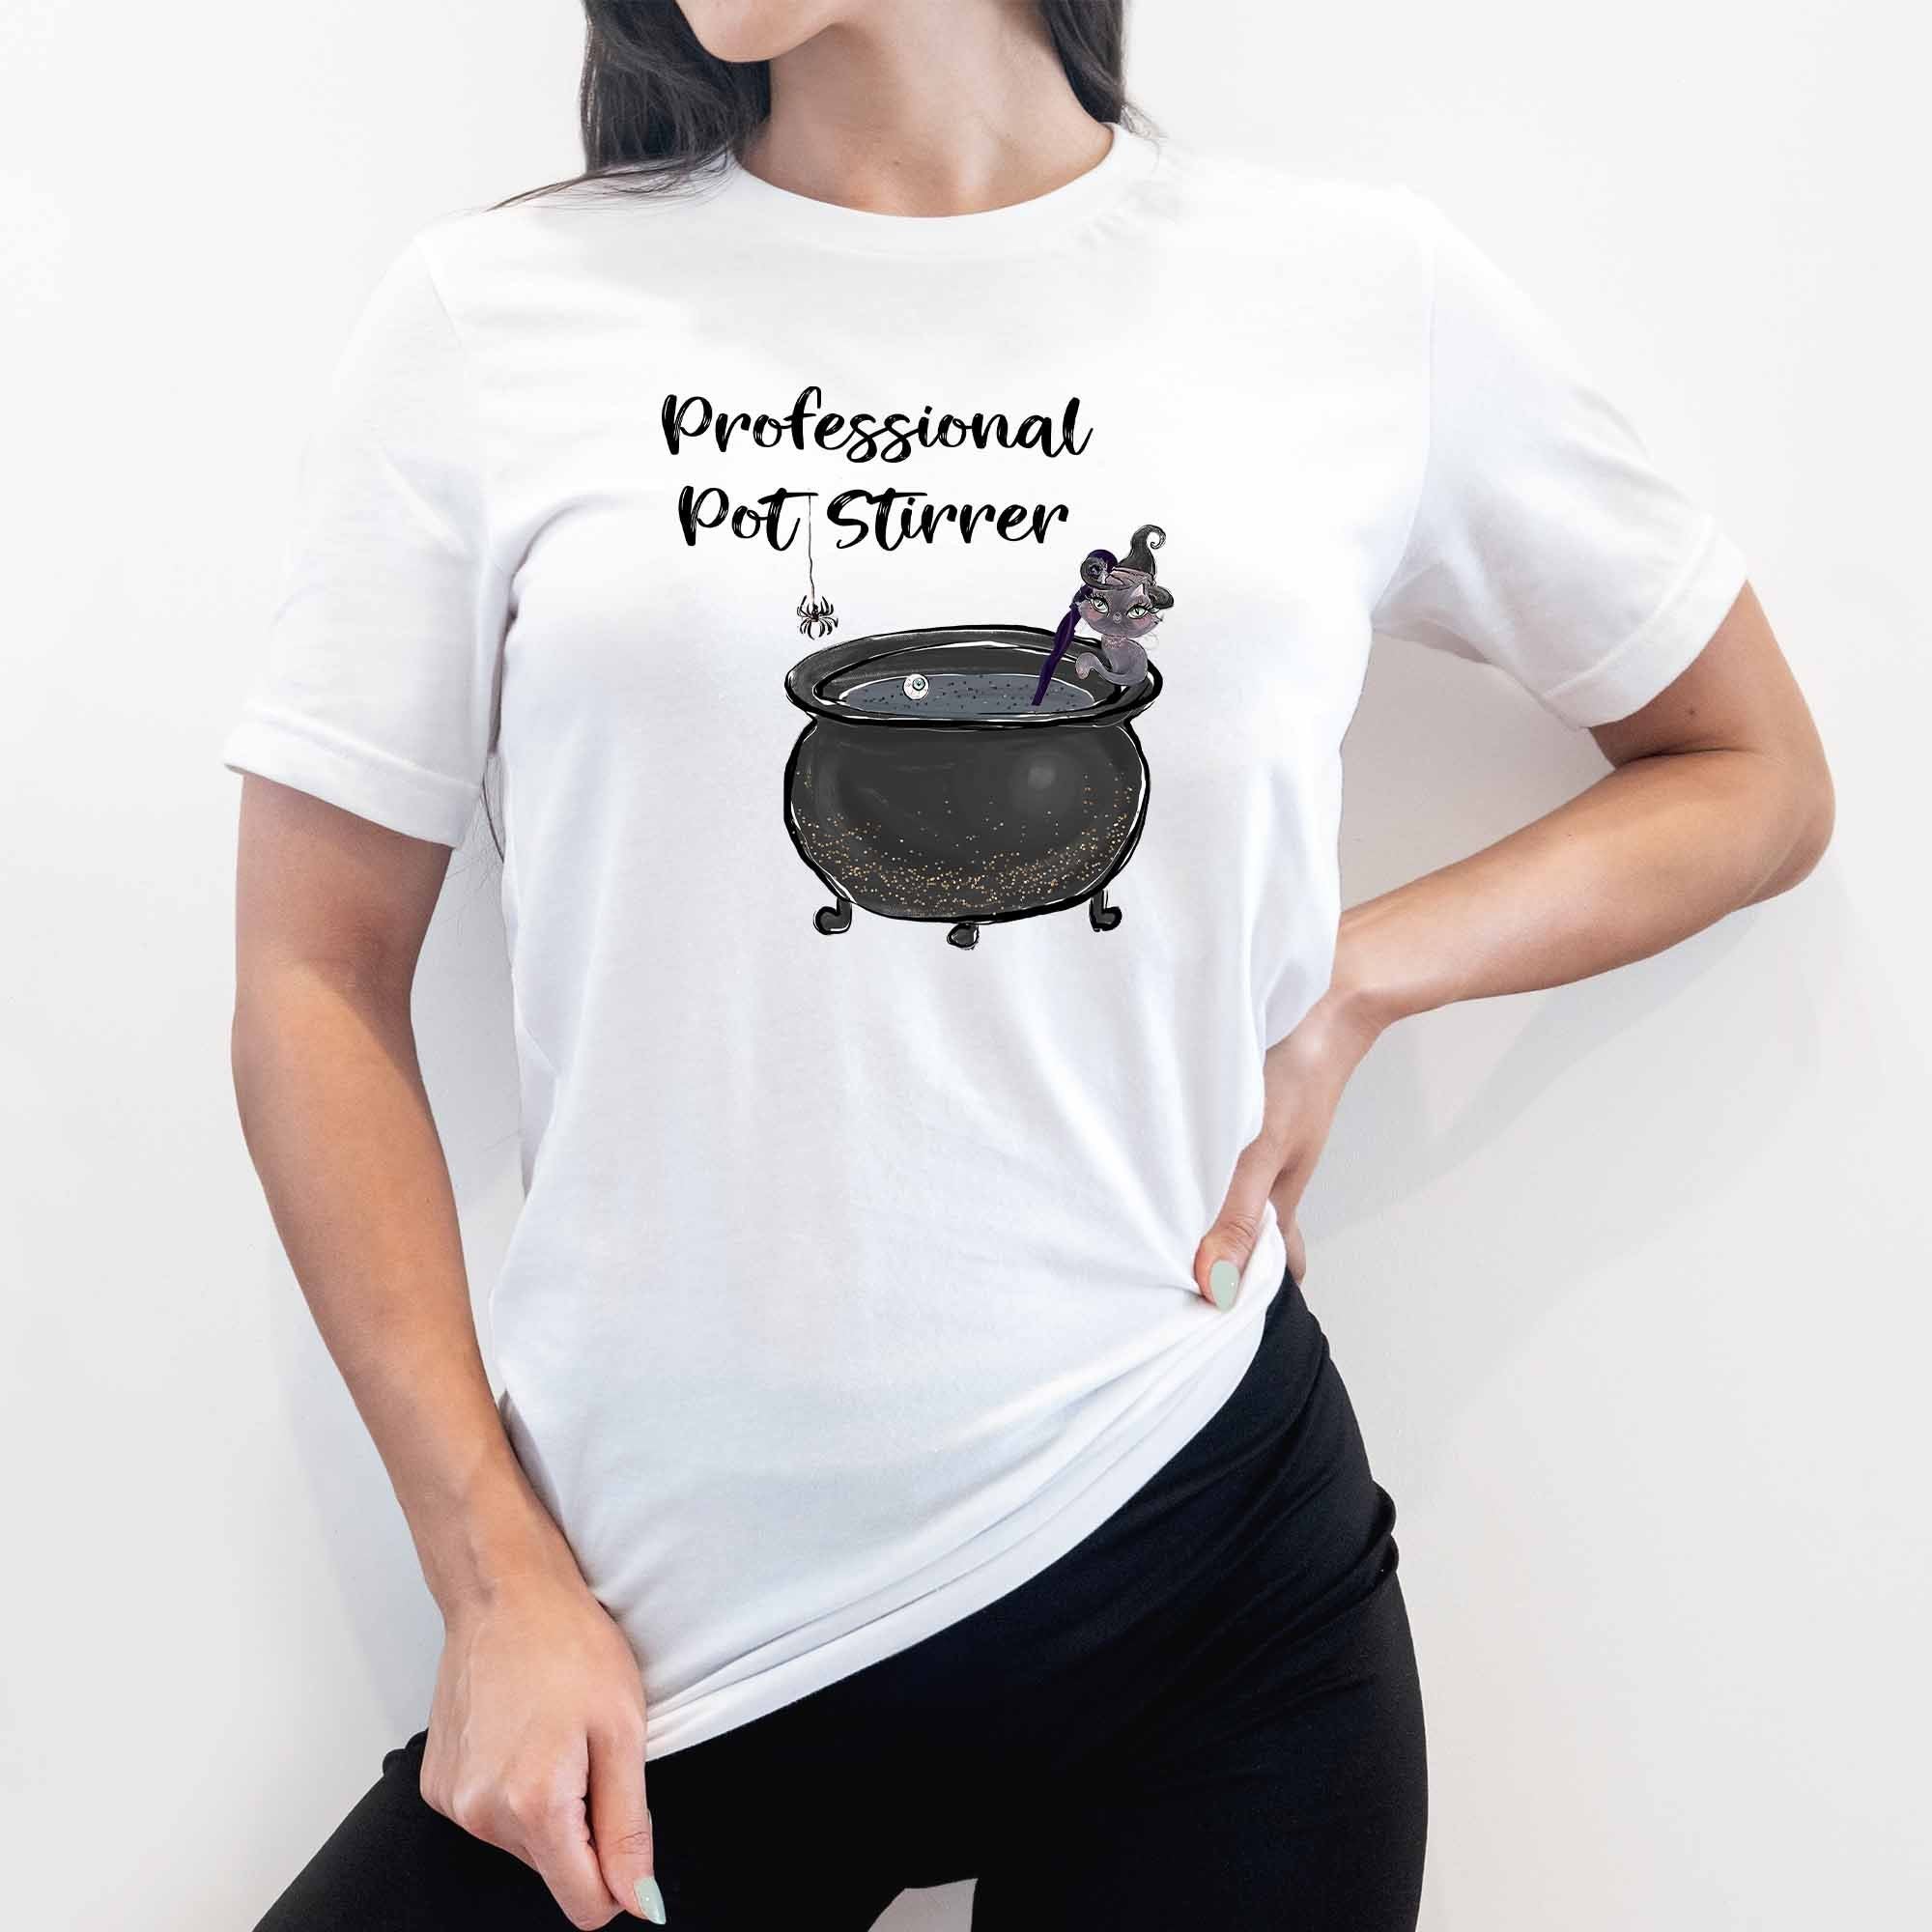 Professional Pot Stirrer Graphic Tee - My Custom Tee Party